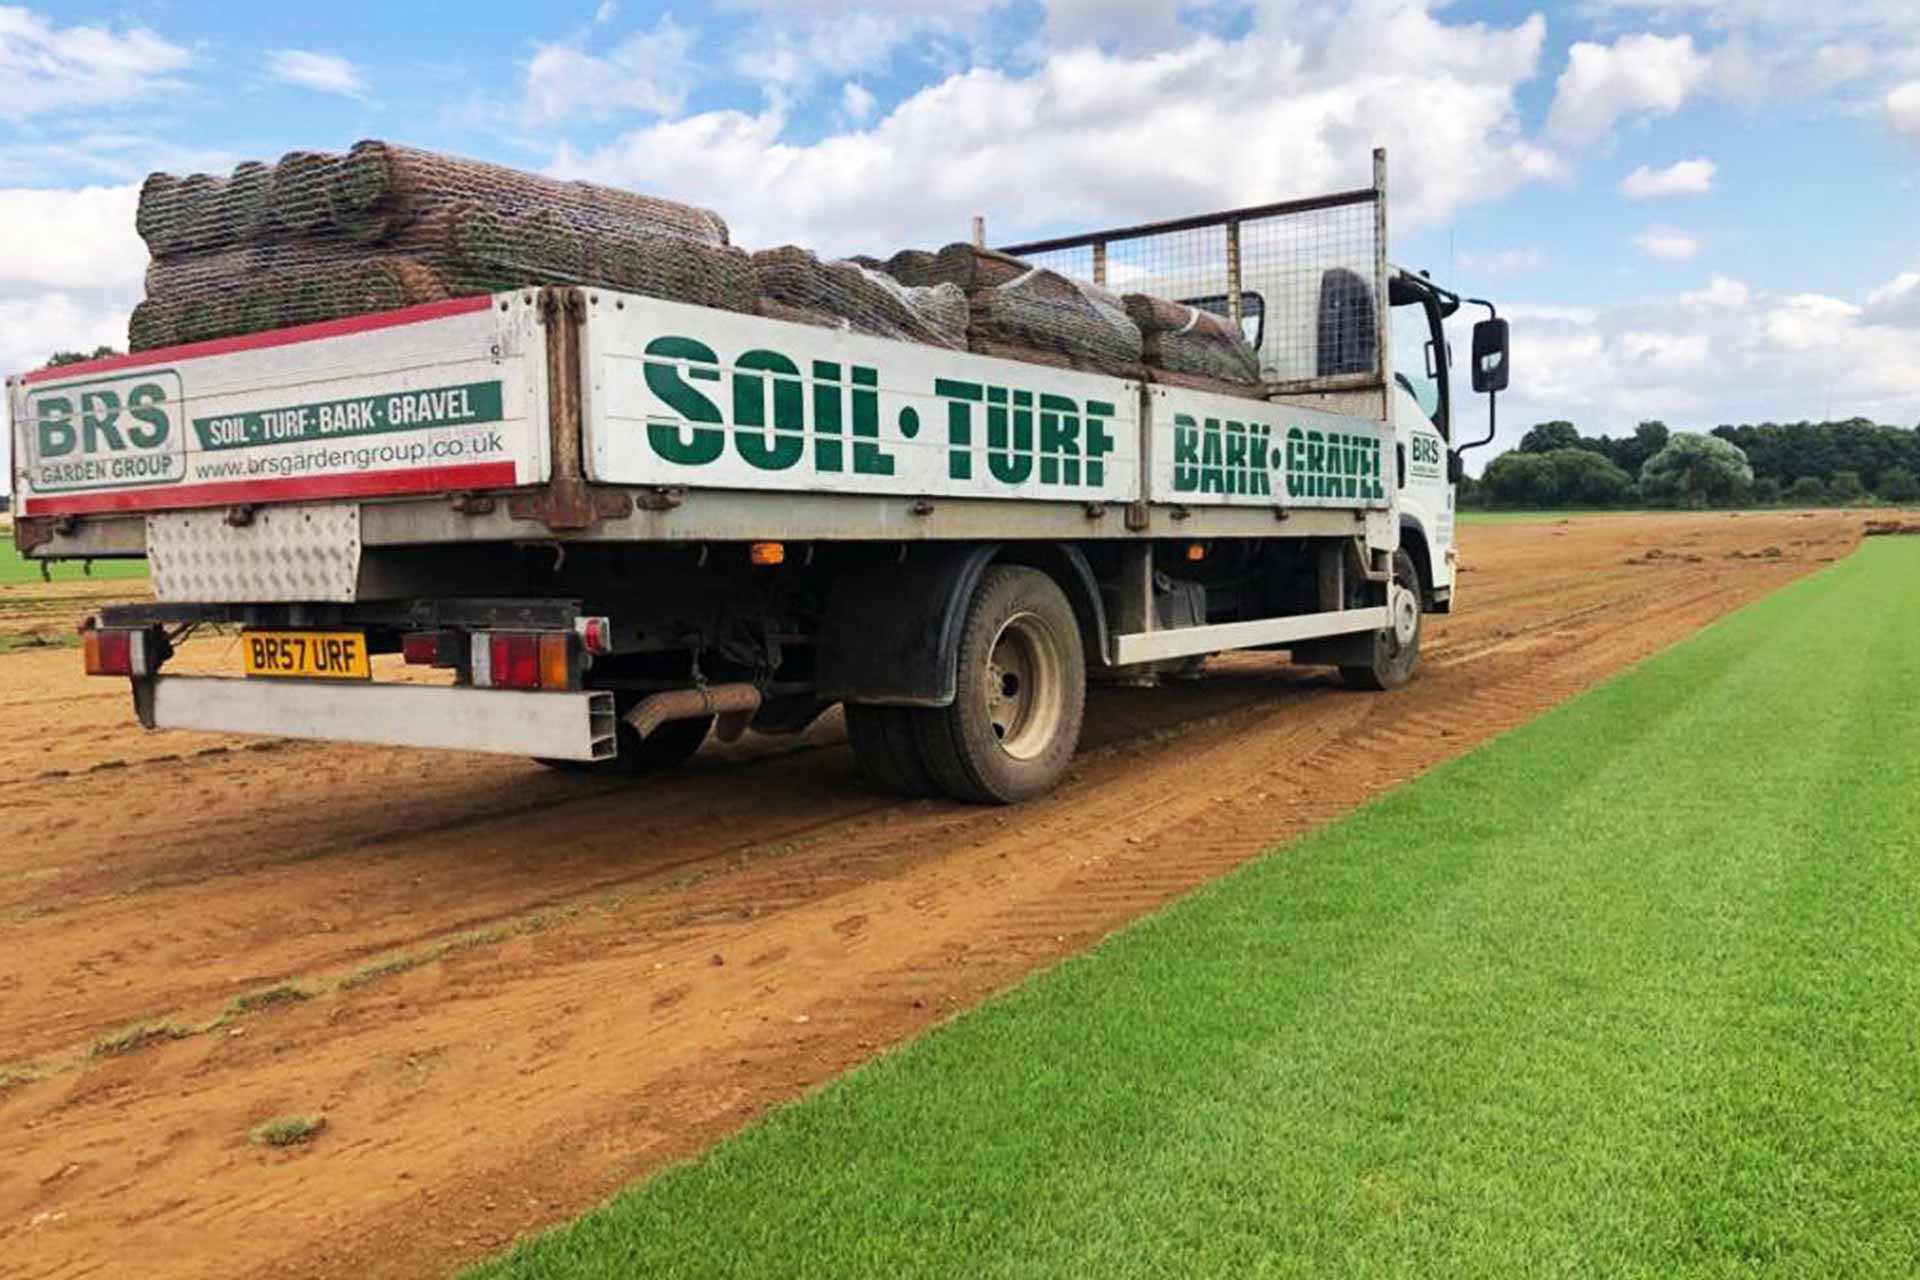 Quality affordable lawn turf & topsoil in Yorkshire